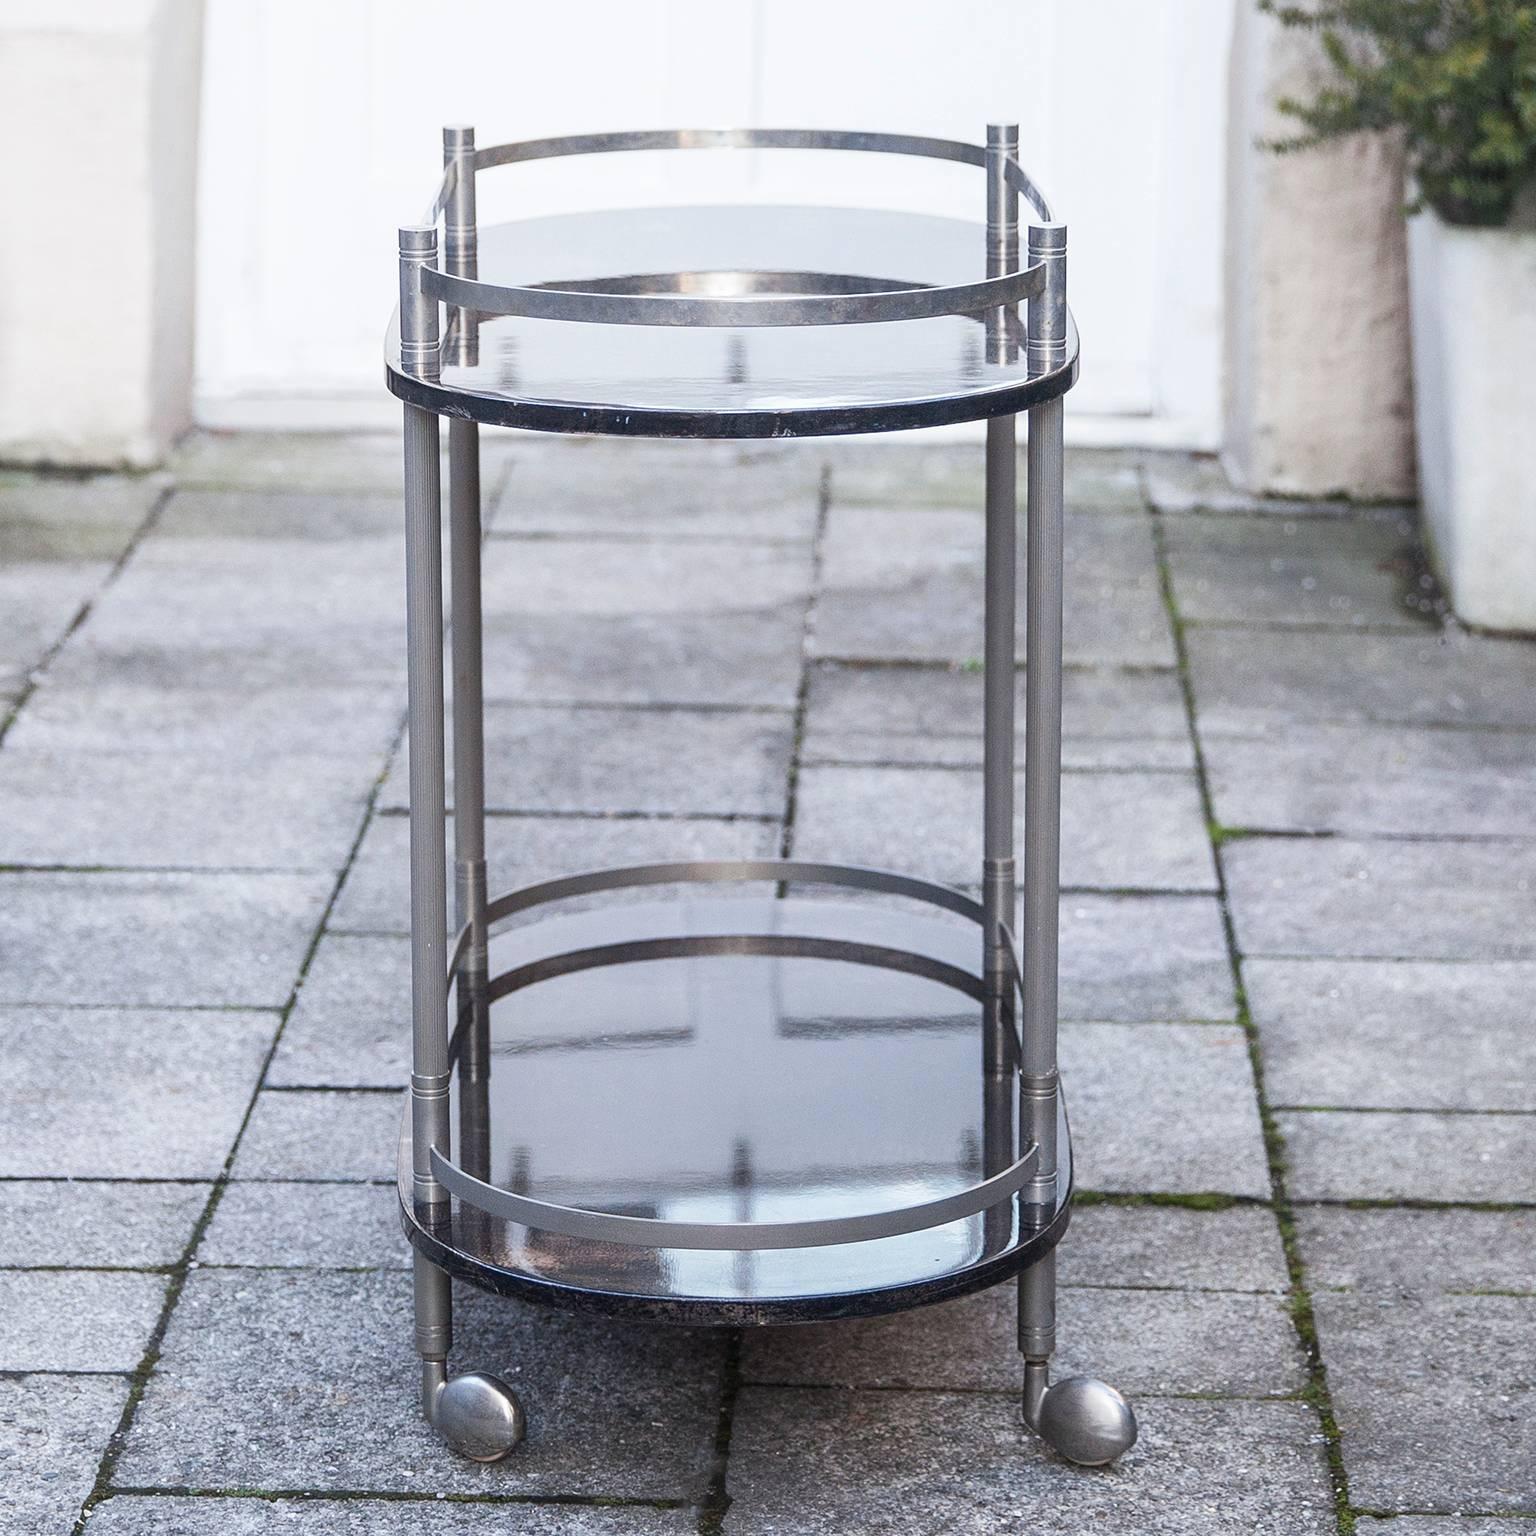 Fine bar or serving cart by Aldo Tura Milan, Italy, 1960s. The bar cart is made
of anthracite brown lacquered goatskin and nickel-plated elements.
Measures: 40.2 D x 89 B x 72 H cm.